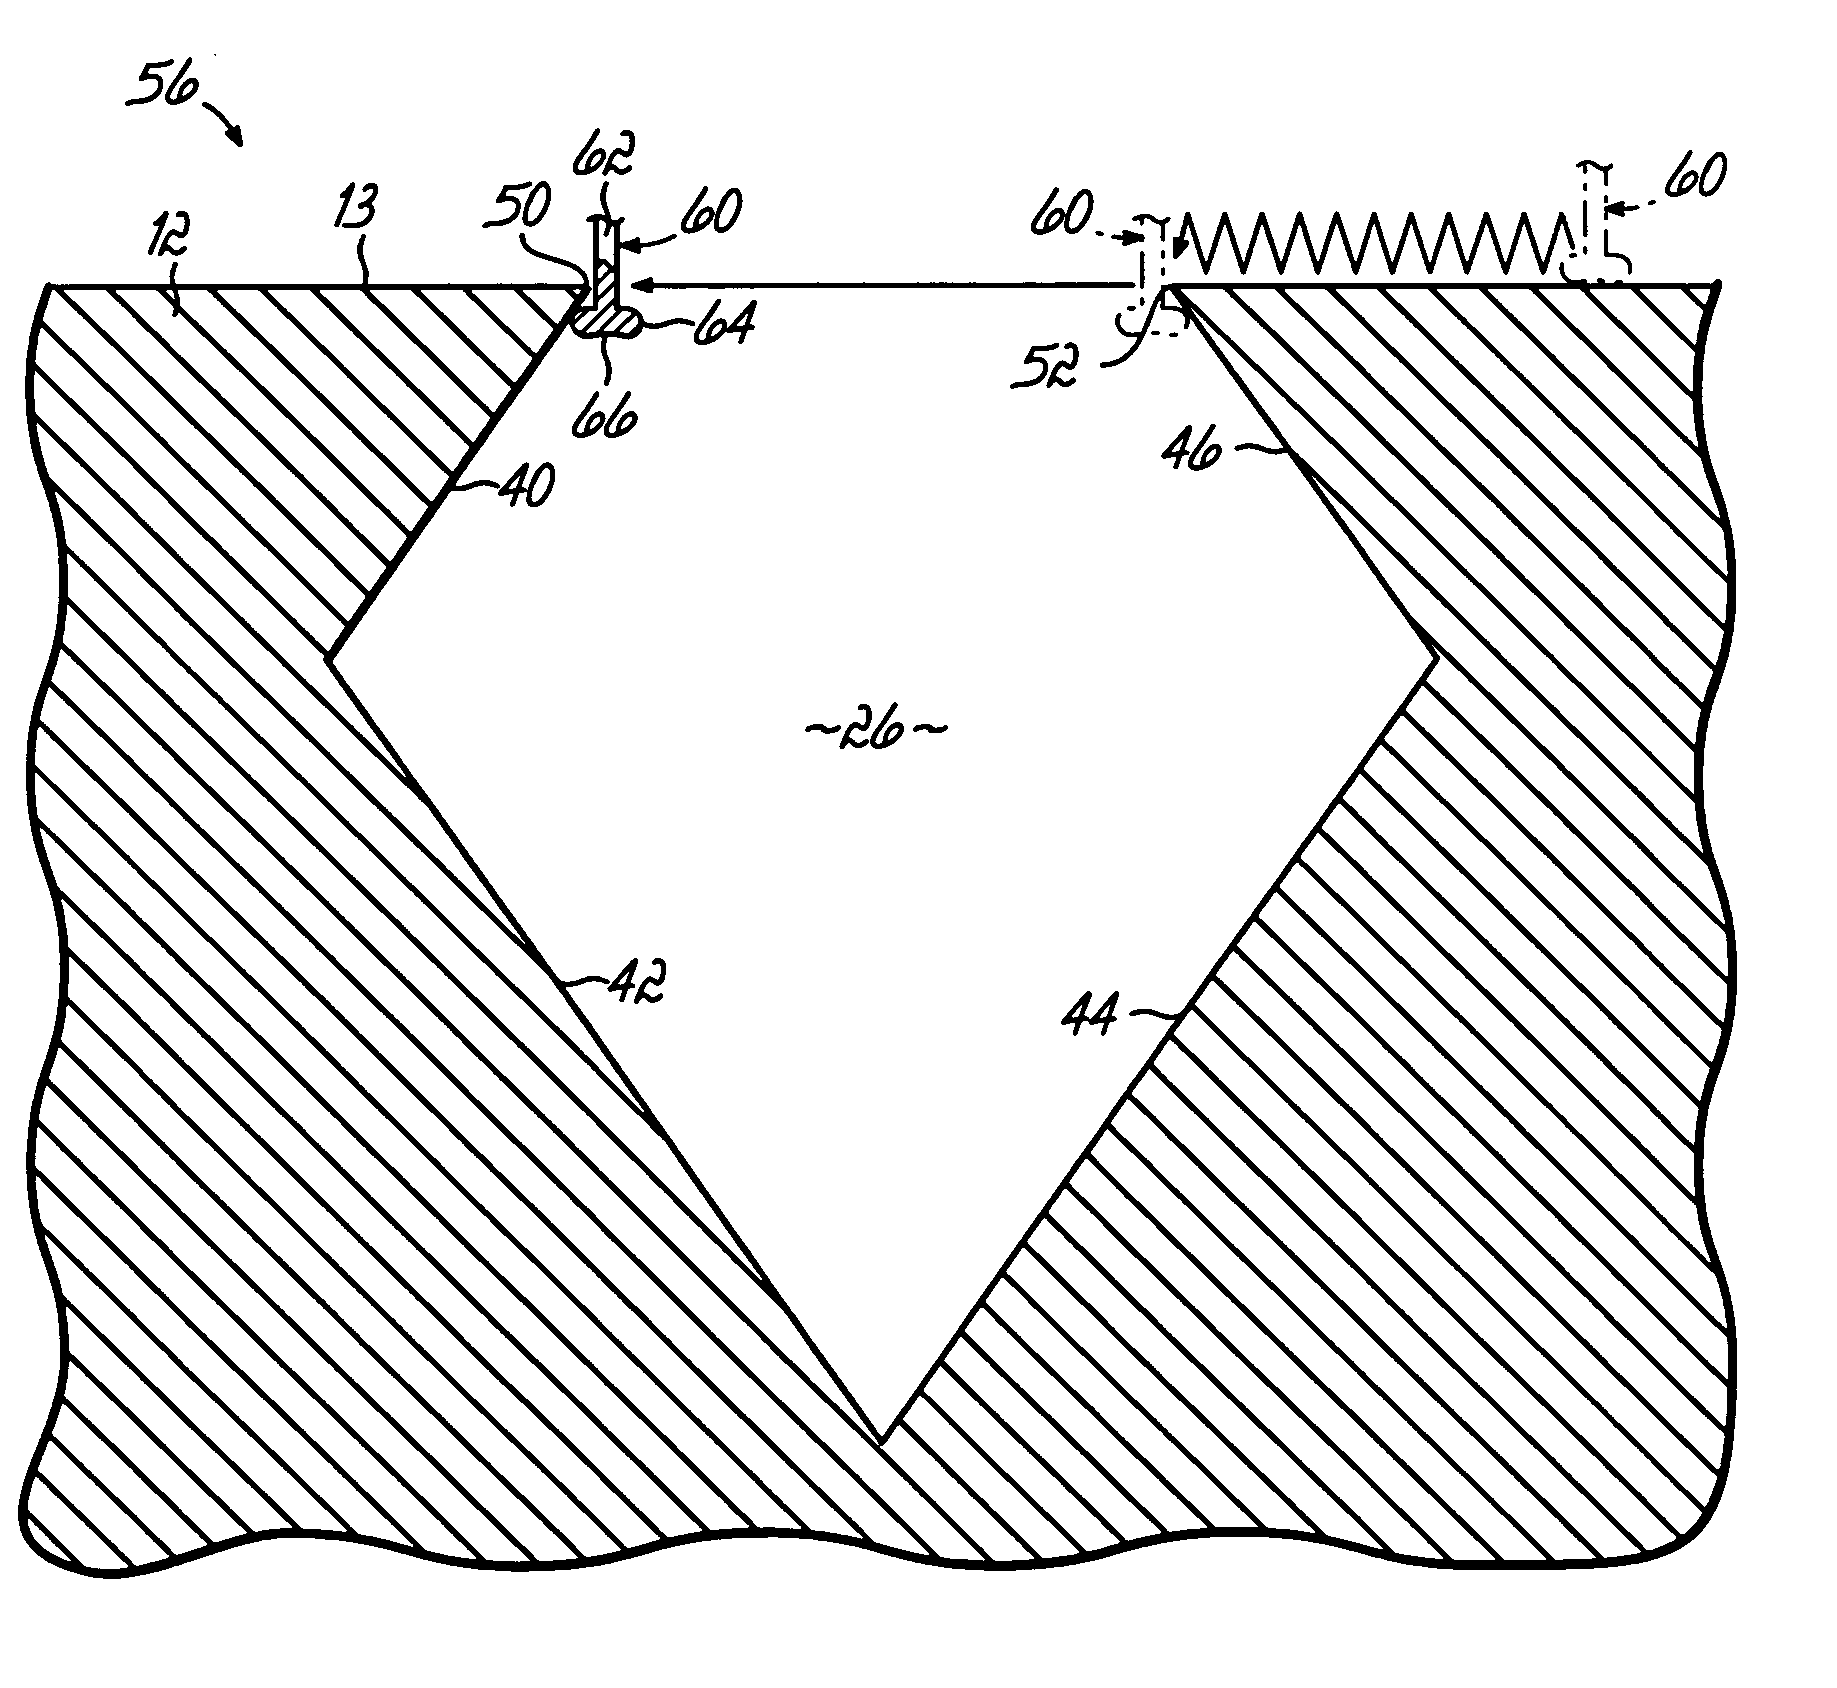 Methods of fabricating structures for characterizing tip shape of scanning probe microscope probes and structures fabricated thereby